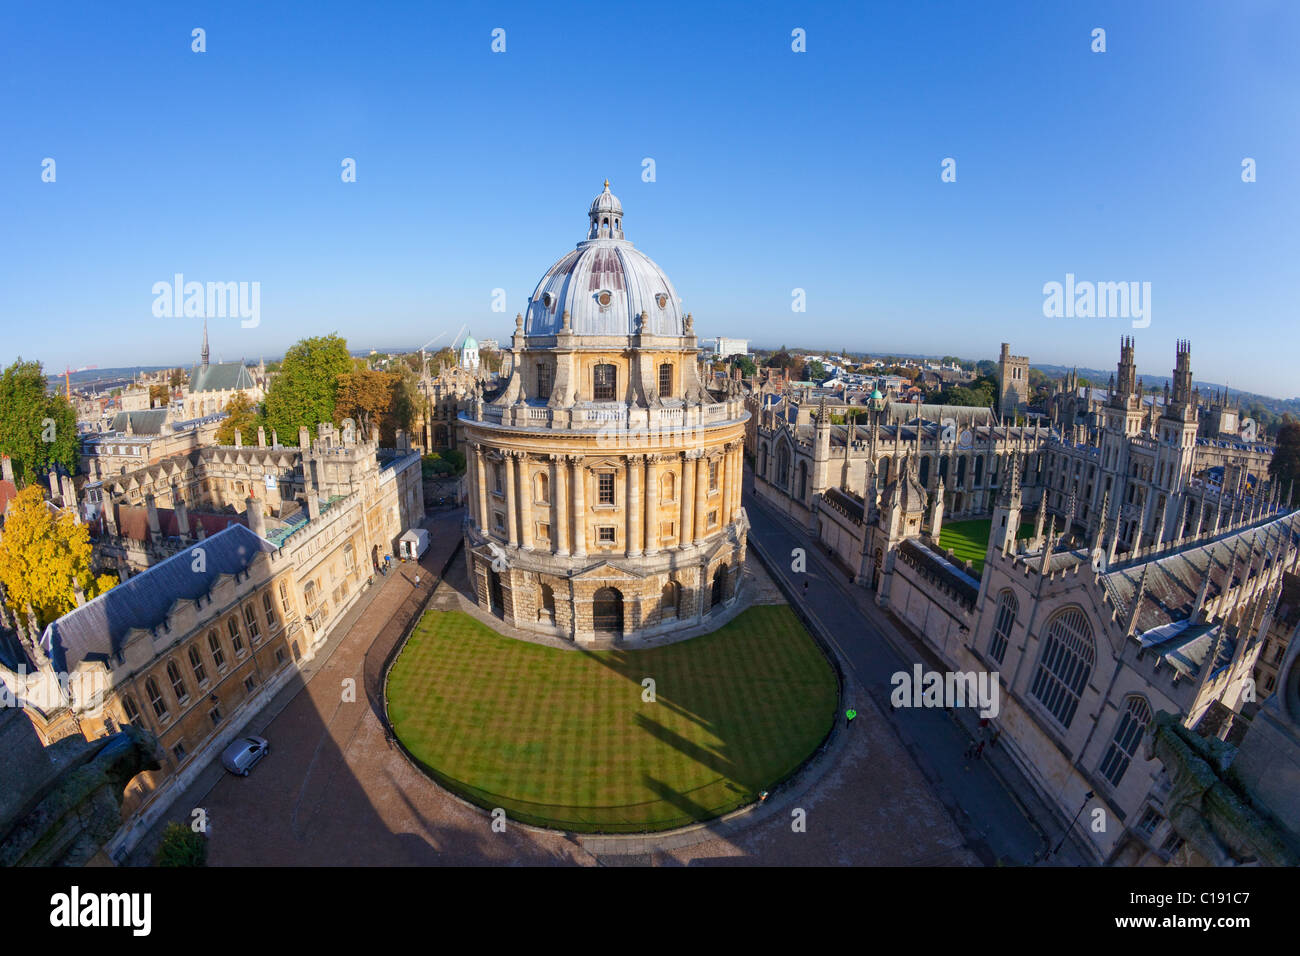 Radcliffe Camera and All Souls College Oxford University England UK United Kingdom GB Great Britain British Isles Europe Stock Photo